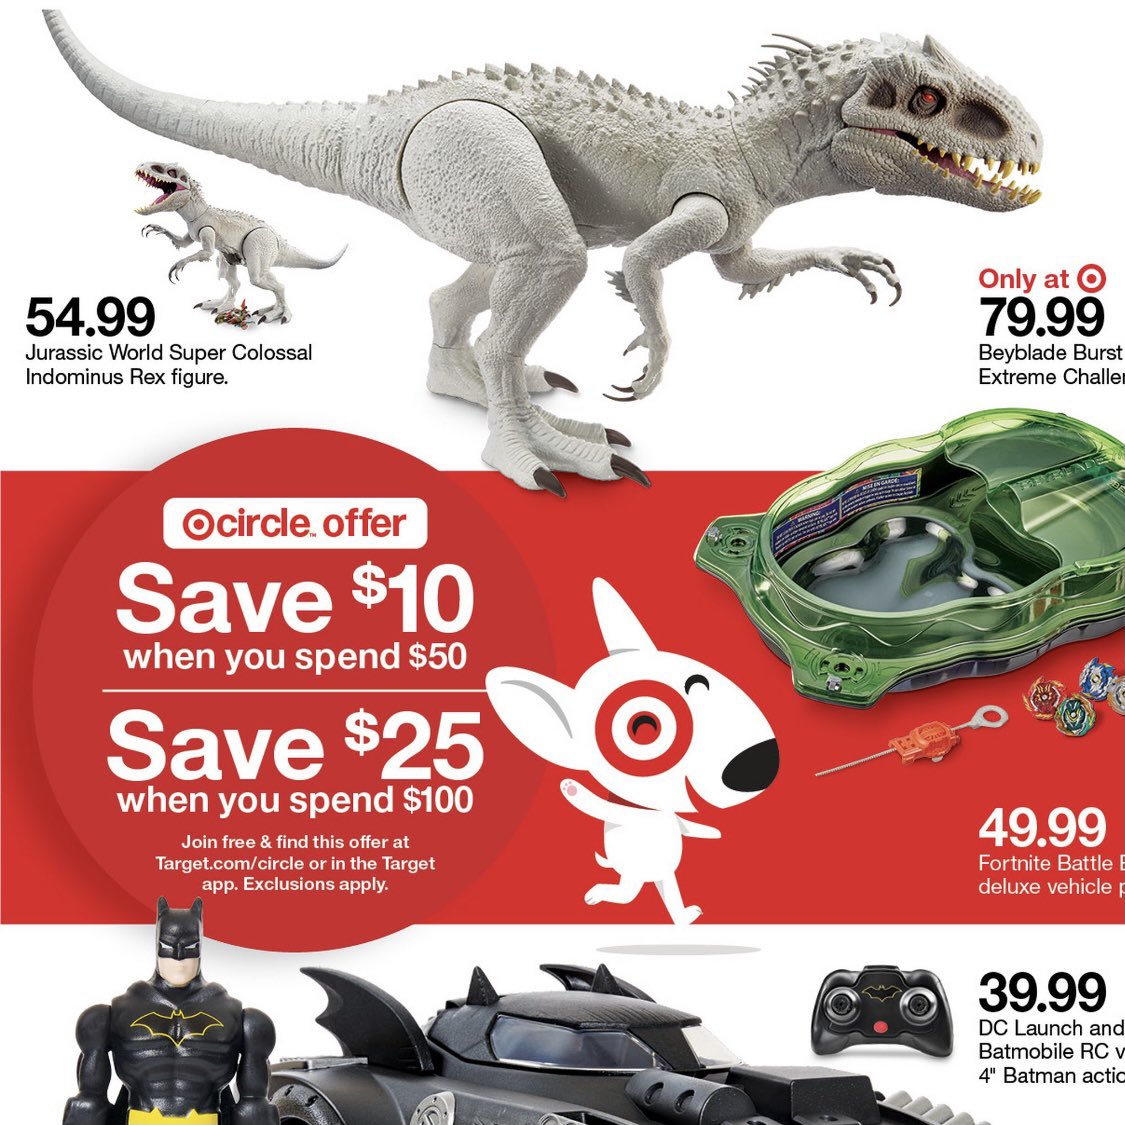 Collect Jurassic Sur Twitter Jurassic X Target In This Week S Target Ad With Both The Just Arrived Amber Collection Delta And Favorite Super Colossal Indominus Rex Getting Some Time In The